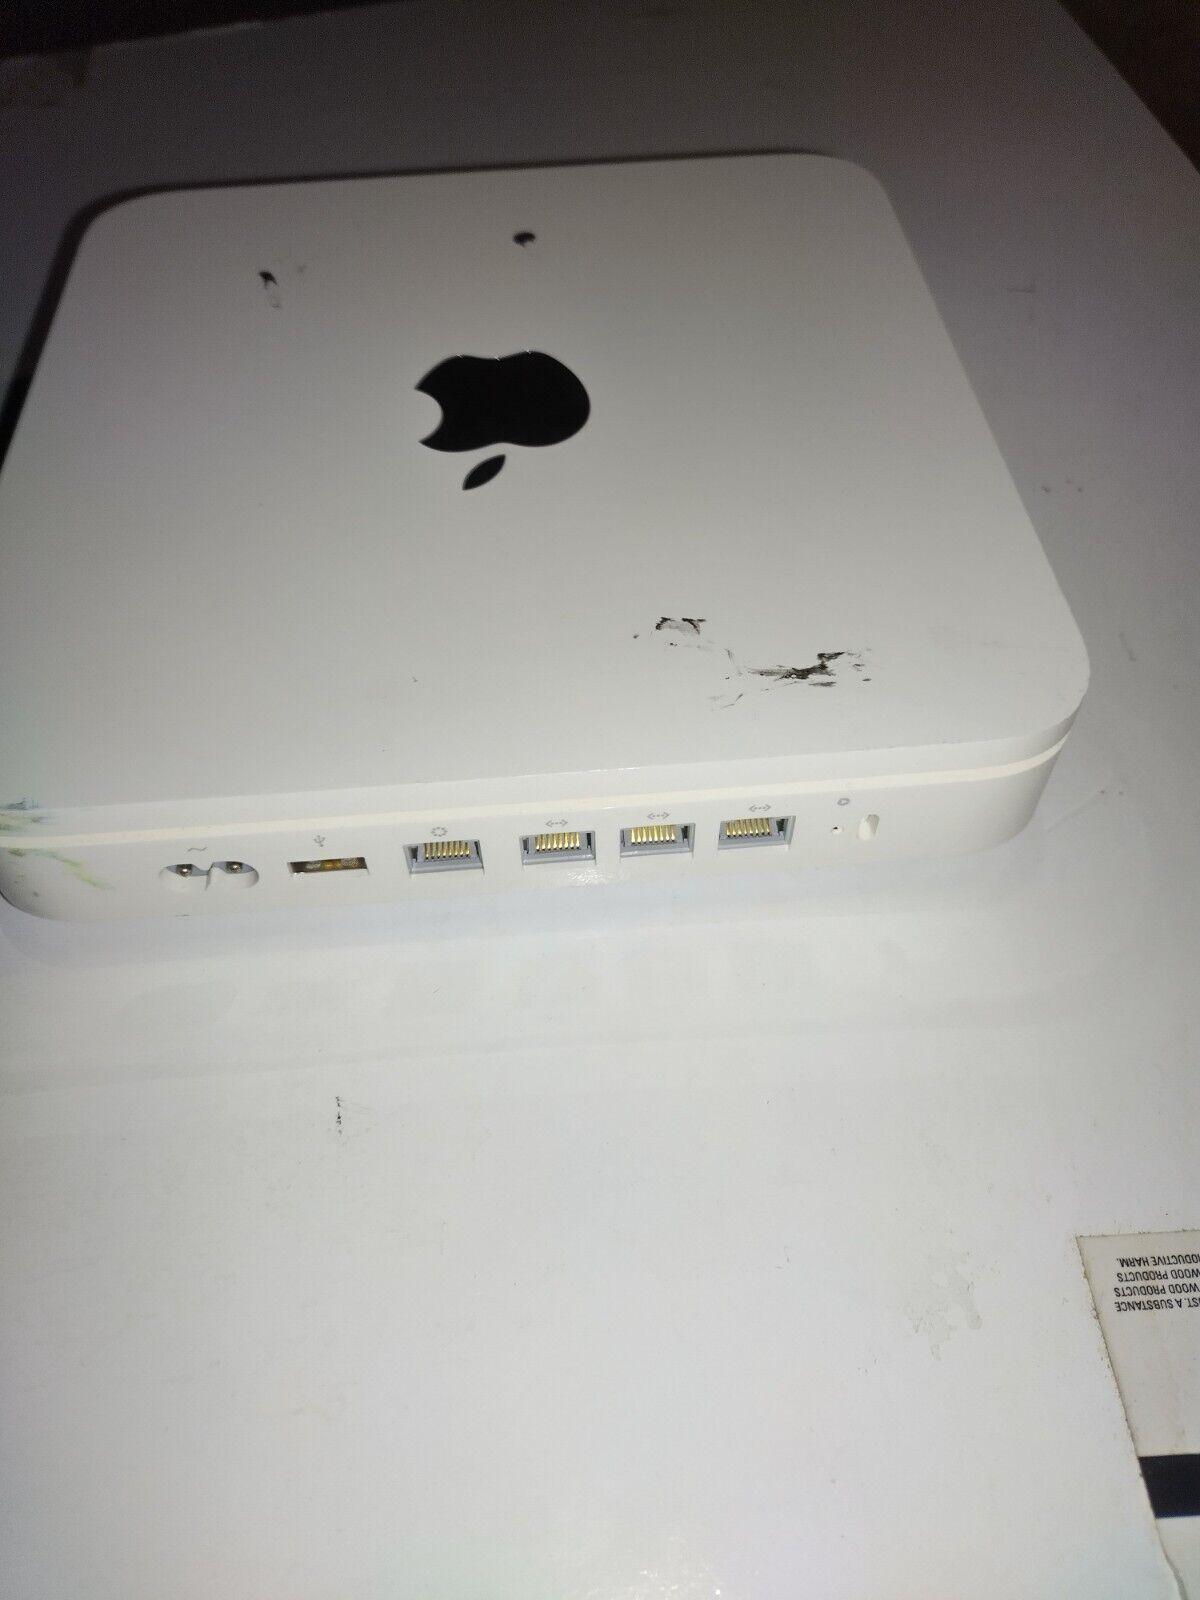 Apple Time Capsule Wi-Fi Router & Network Hard Drive (500GB), Tested